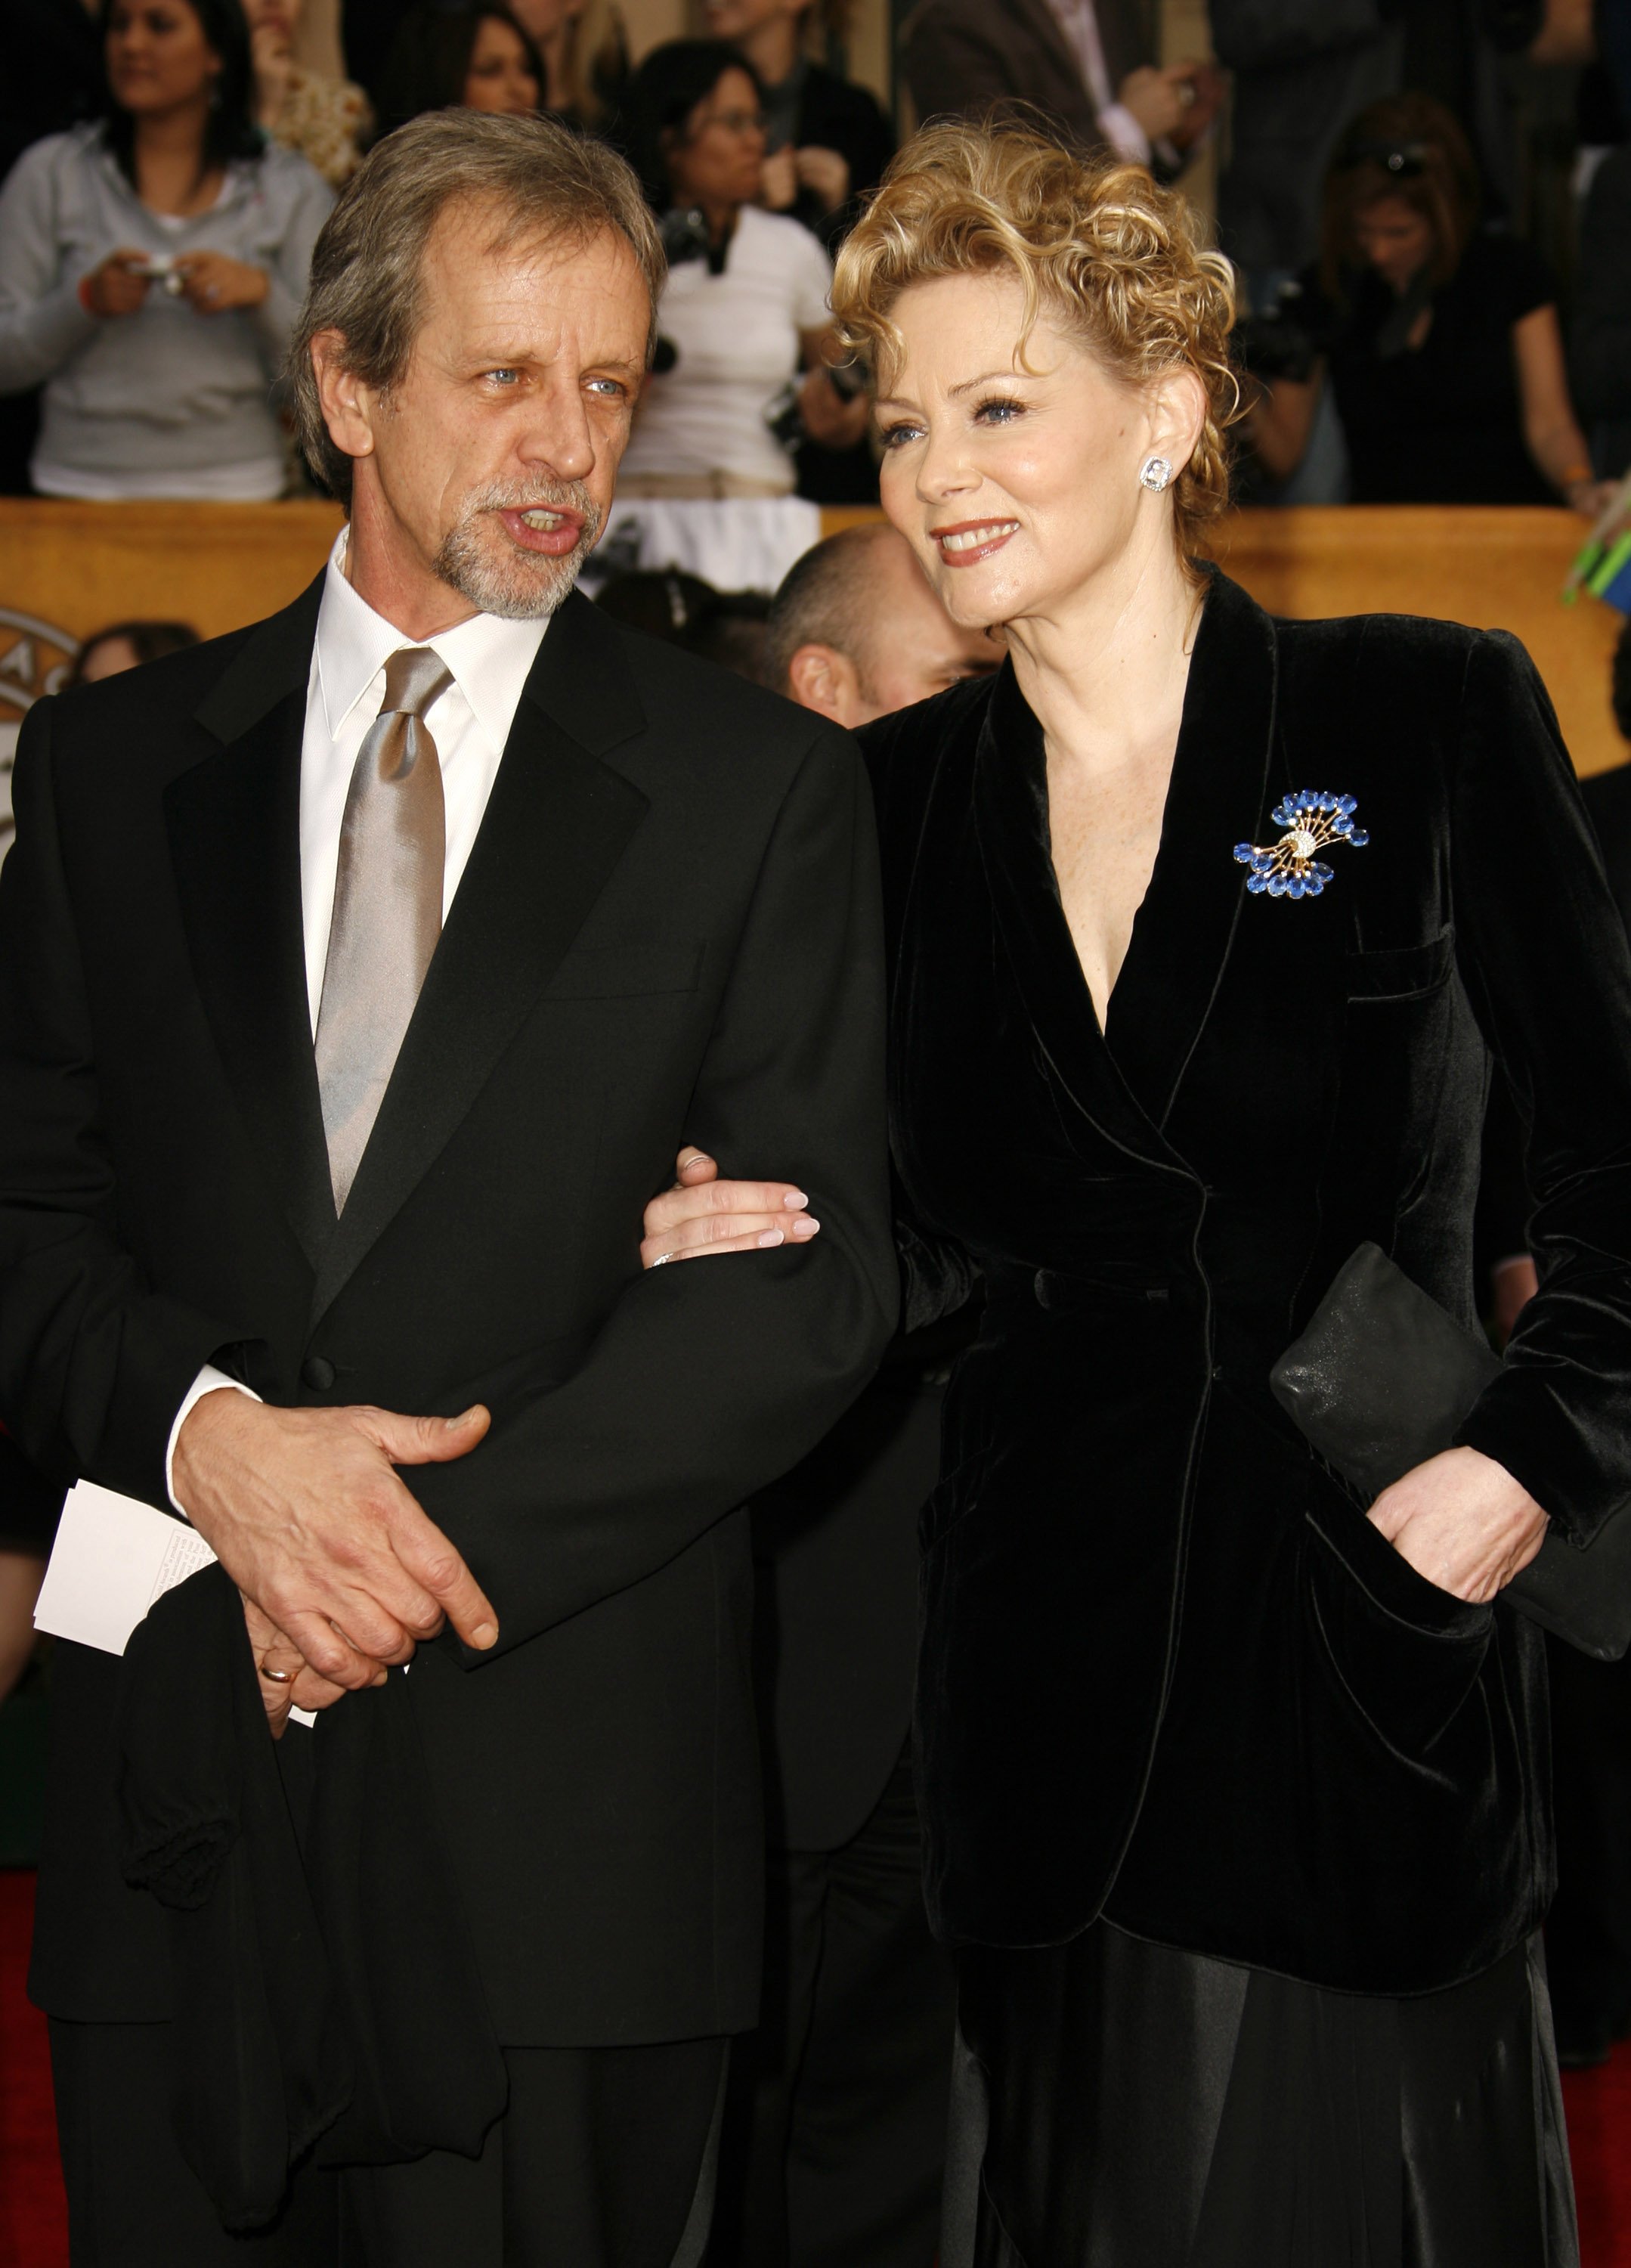 Richard Gilliland and Jean Smart during 13th Annual Screen Actors Guild Awards - Arrivals at Shrine Auditorium in Los Angeles, California, United States. | Source: Getty Images